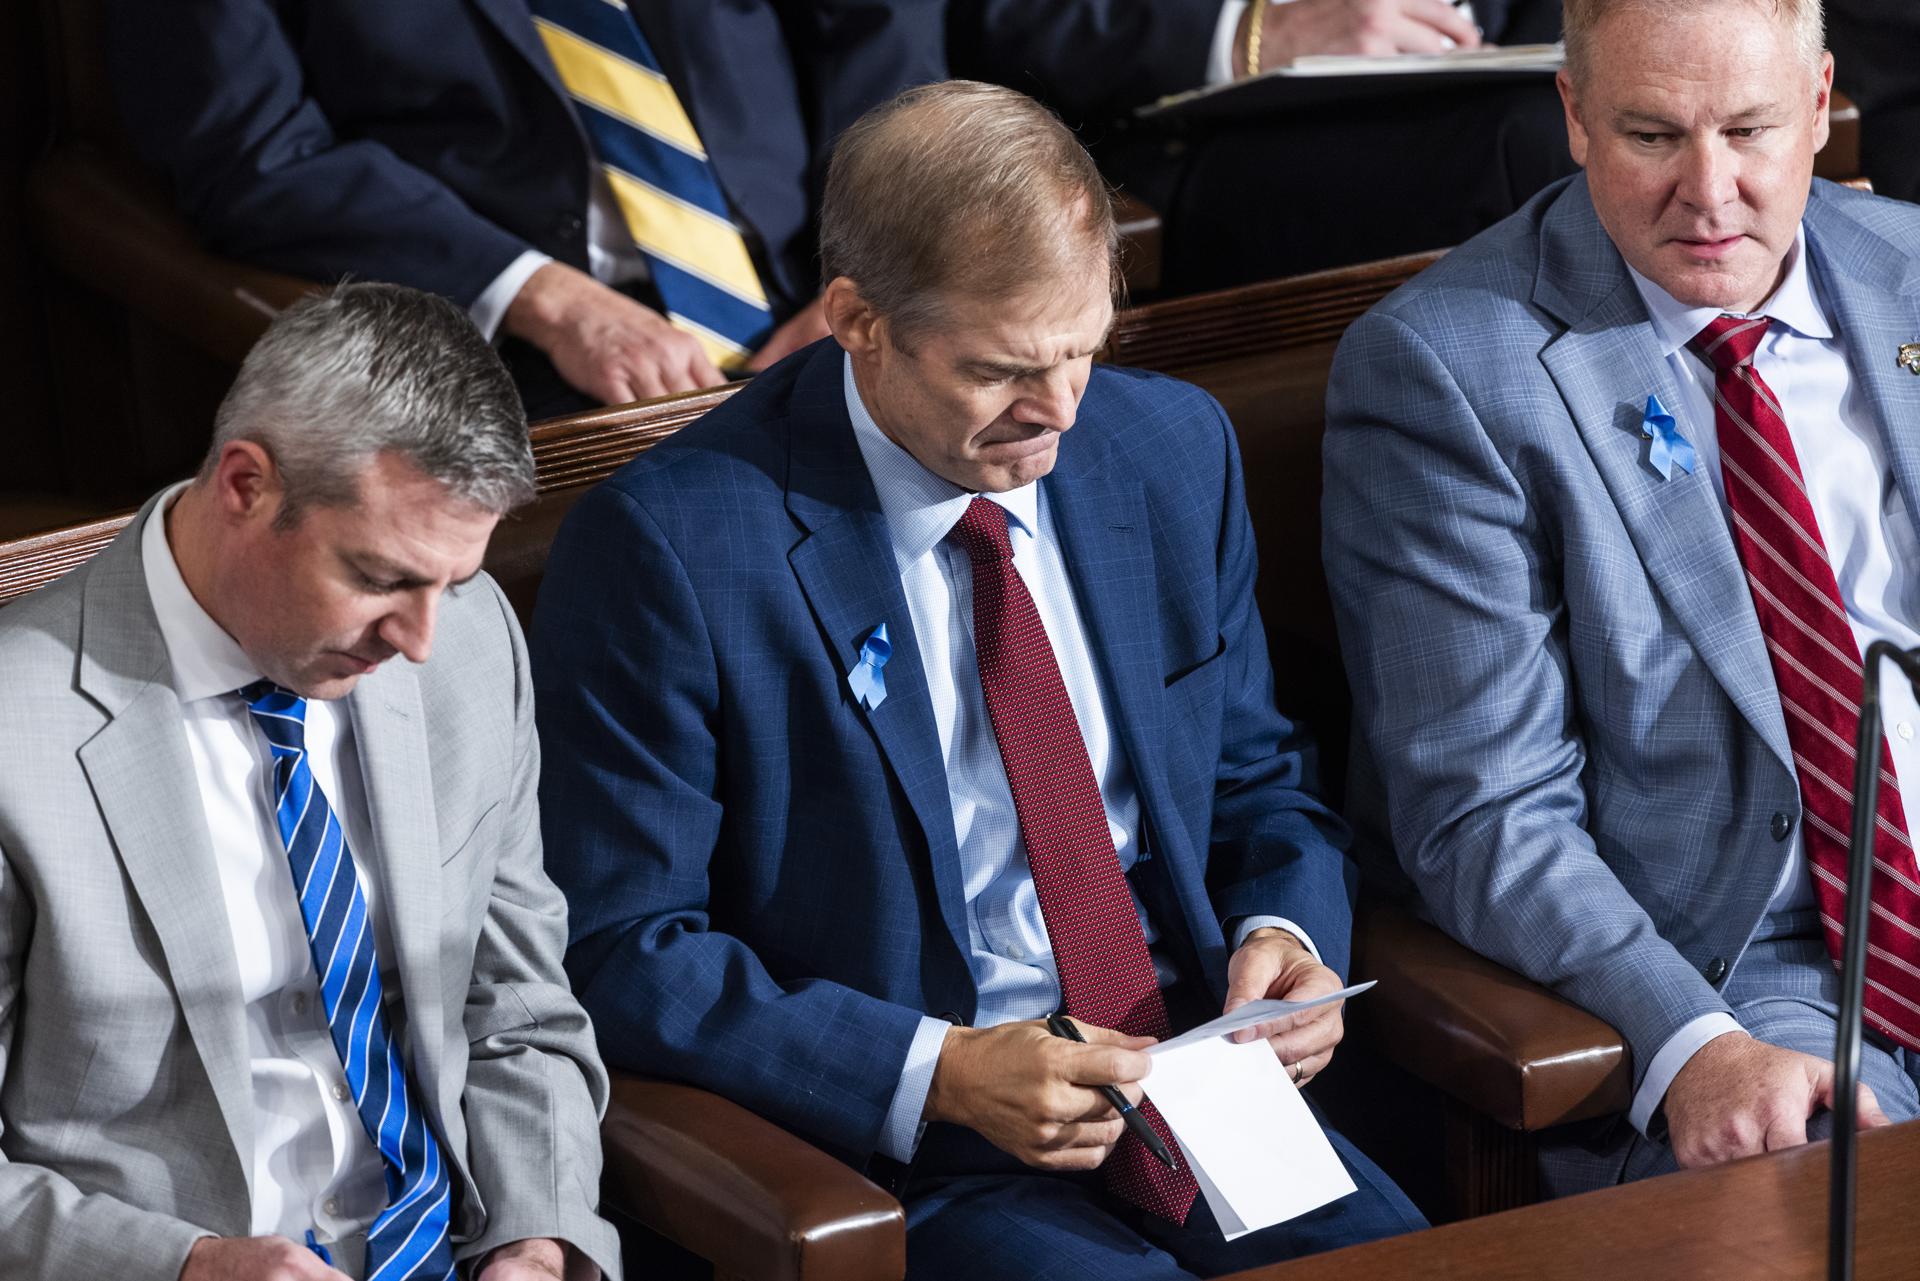 Republican lawmaker from Ohio Jim Jordan (C) tallies votes on the House floor during a second failed bid for him to be the next Speaker of the House in the US Capitol in Washington, DC, USA, 18 October 2023. EFE/EPA/JIM LO SCALZO